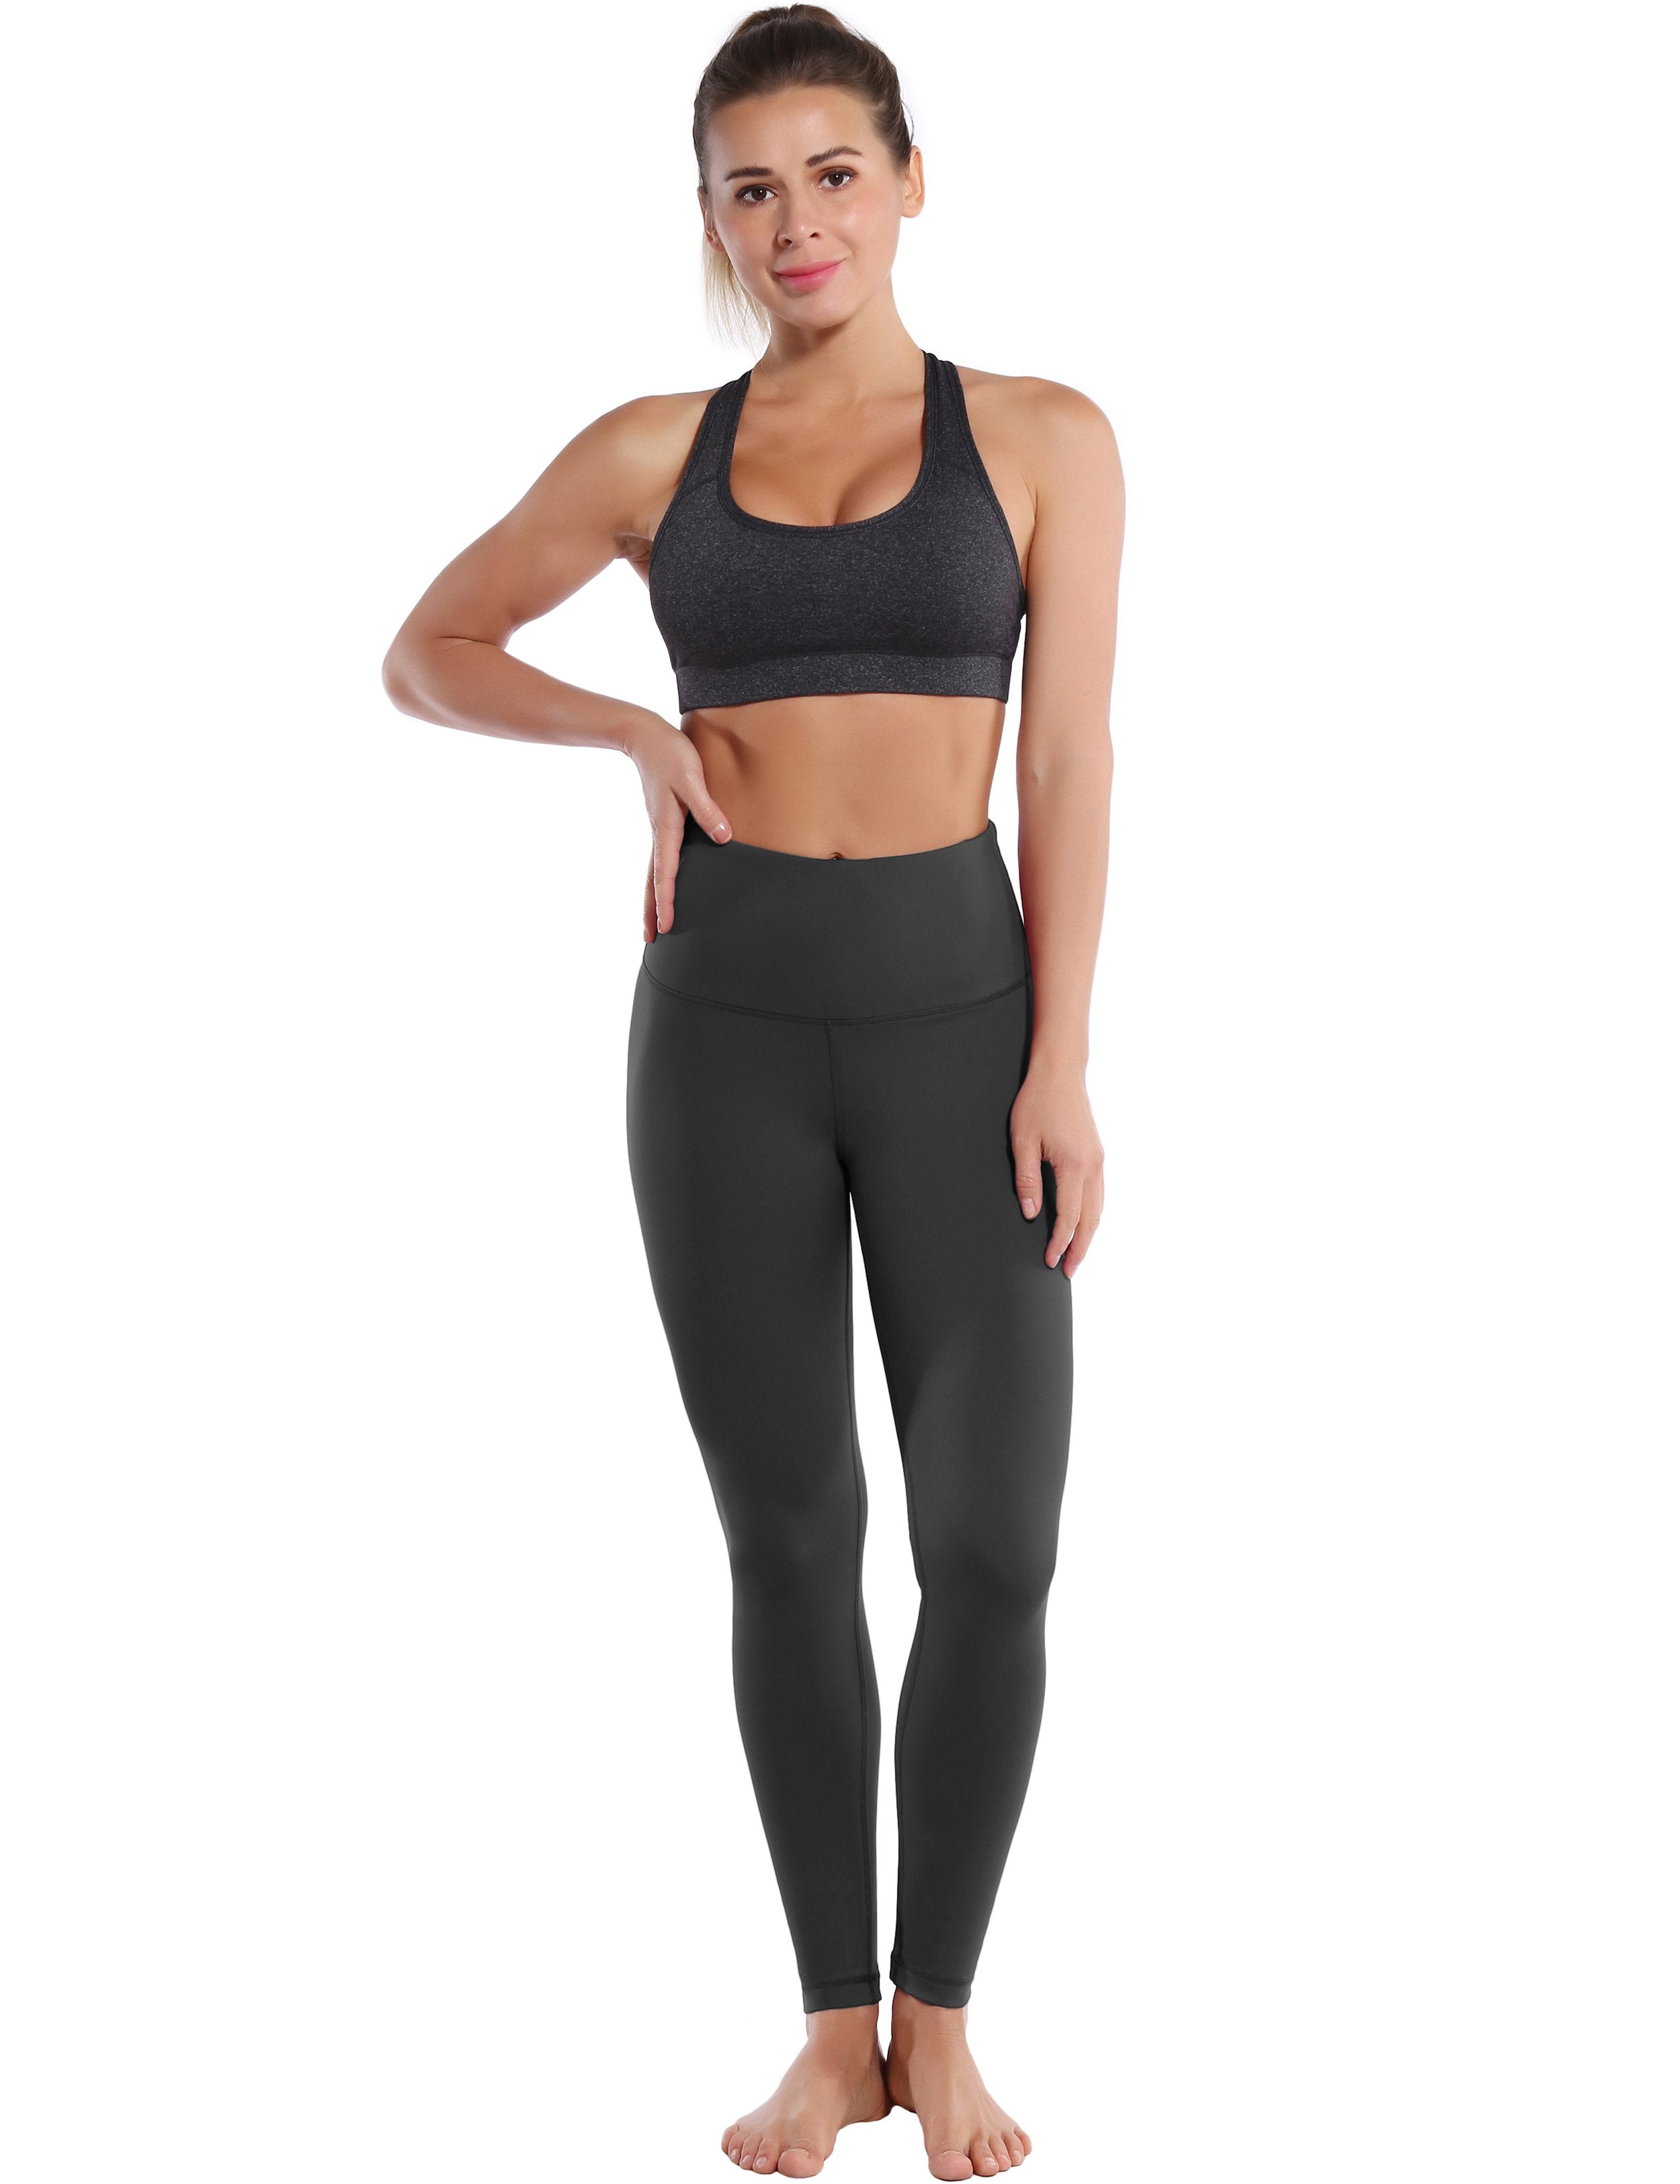 High Waist Gym Pants shadowcharcoal 75%Nylon/25%Spandex Fabric doesn't attract lint easily 4-way stretch No see-through Moisture-wicking Tummy control Inner pocket Four lengths